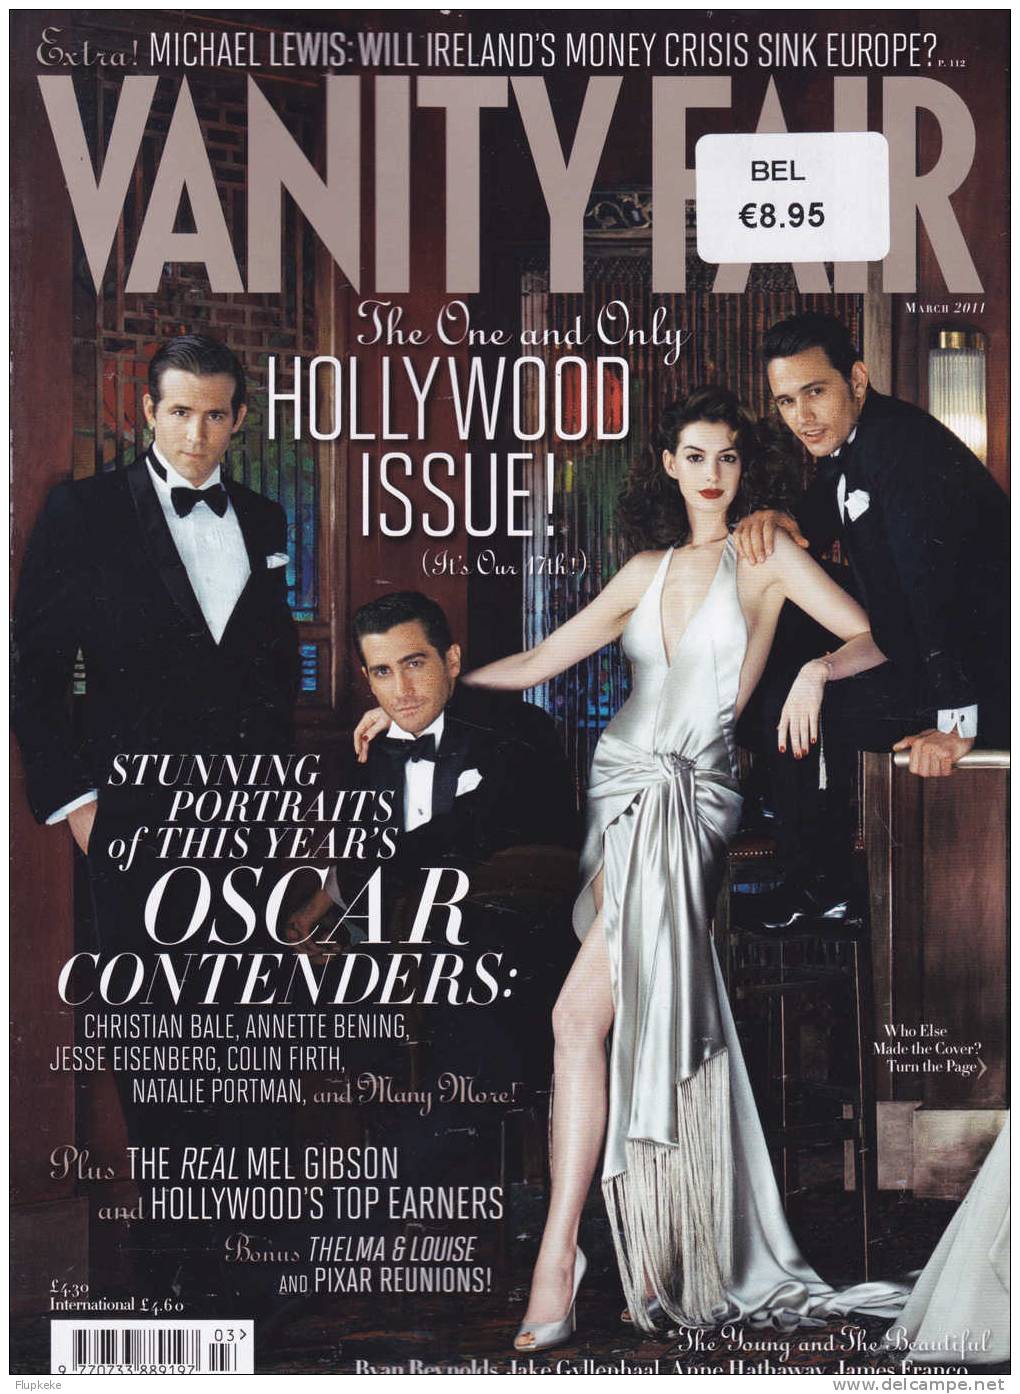 Vanity Fair 607 March 2011 The One And Only Hollywood Issue - Unterhaltung